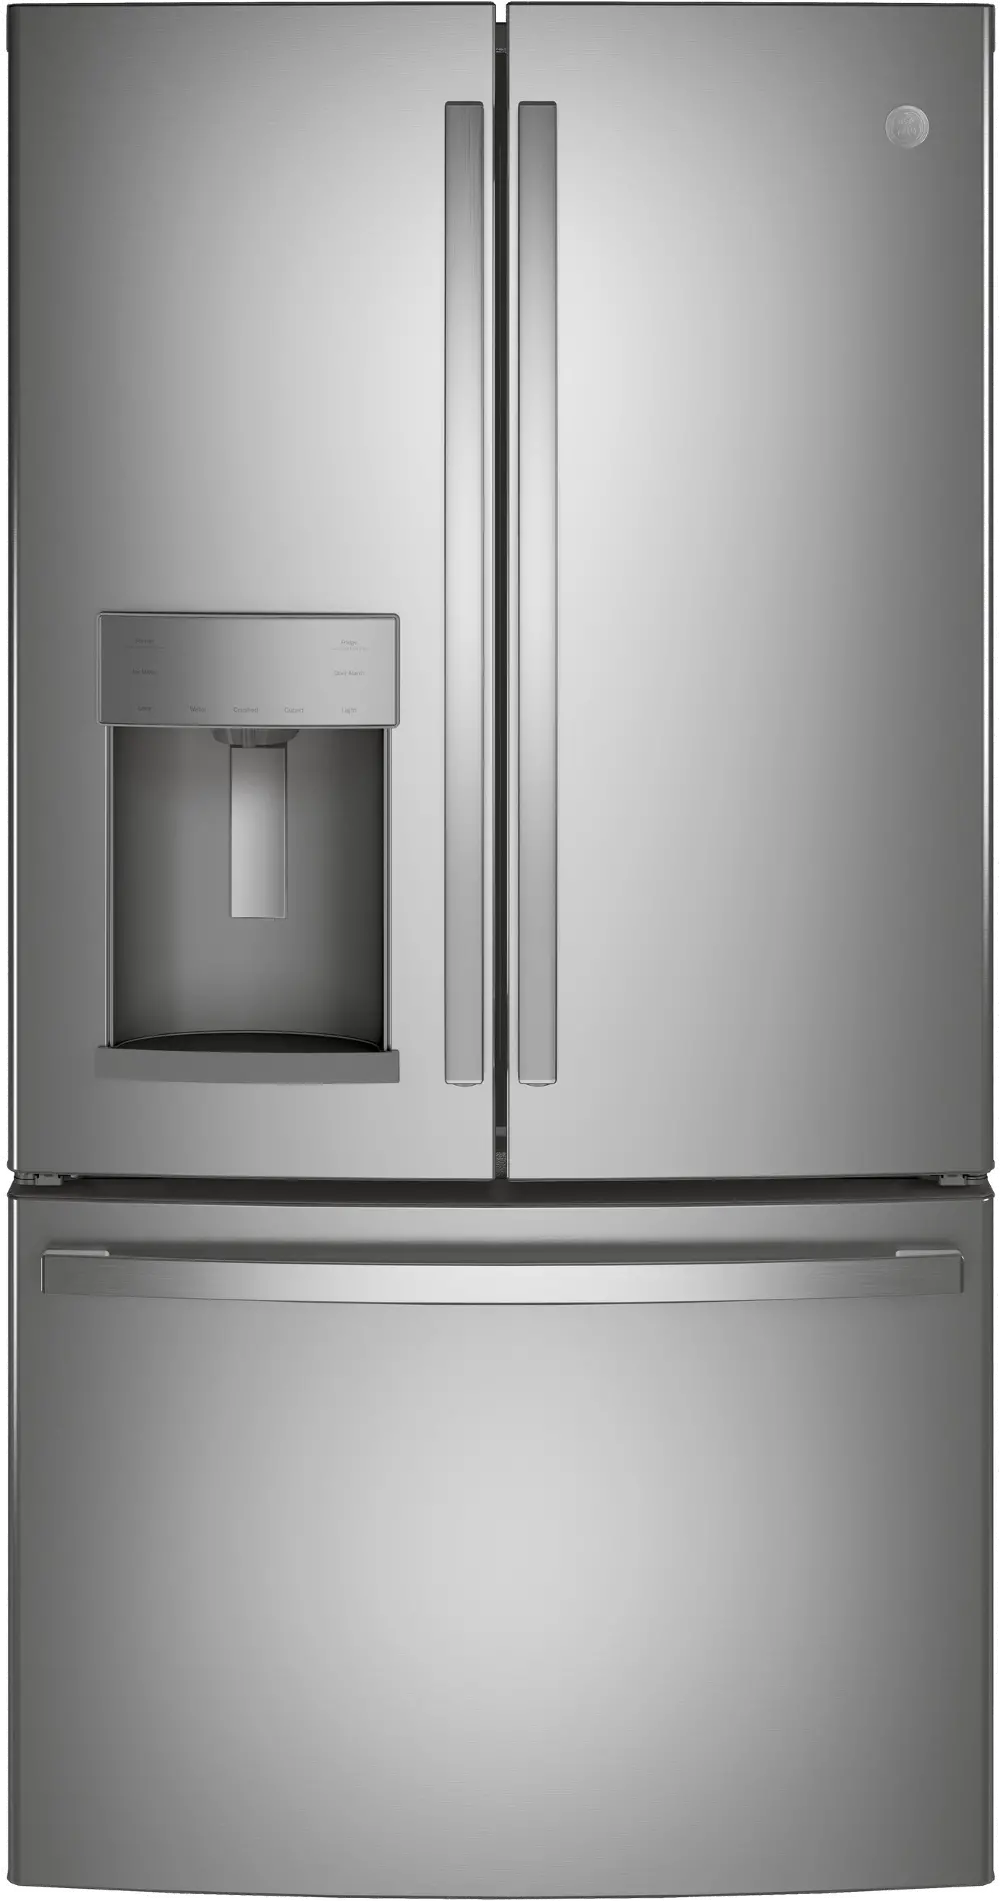 GFE28GYNFS GE 27.8 cu ft French Door Refrigerator - Stainless Steel-1